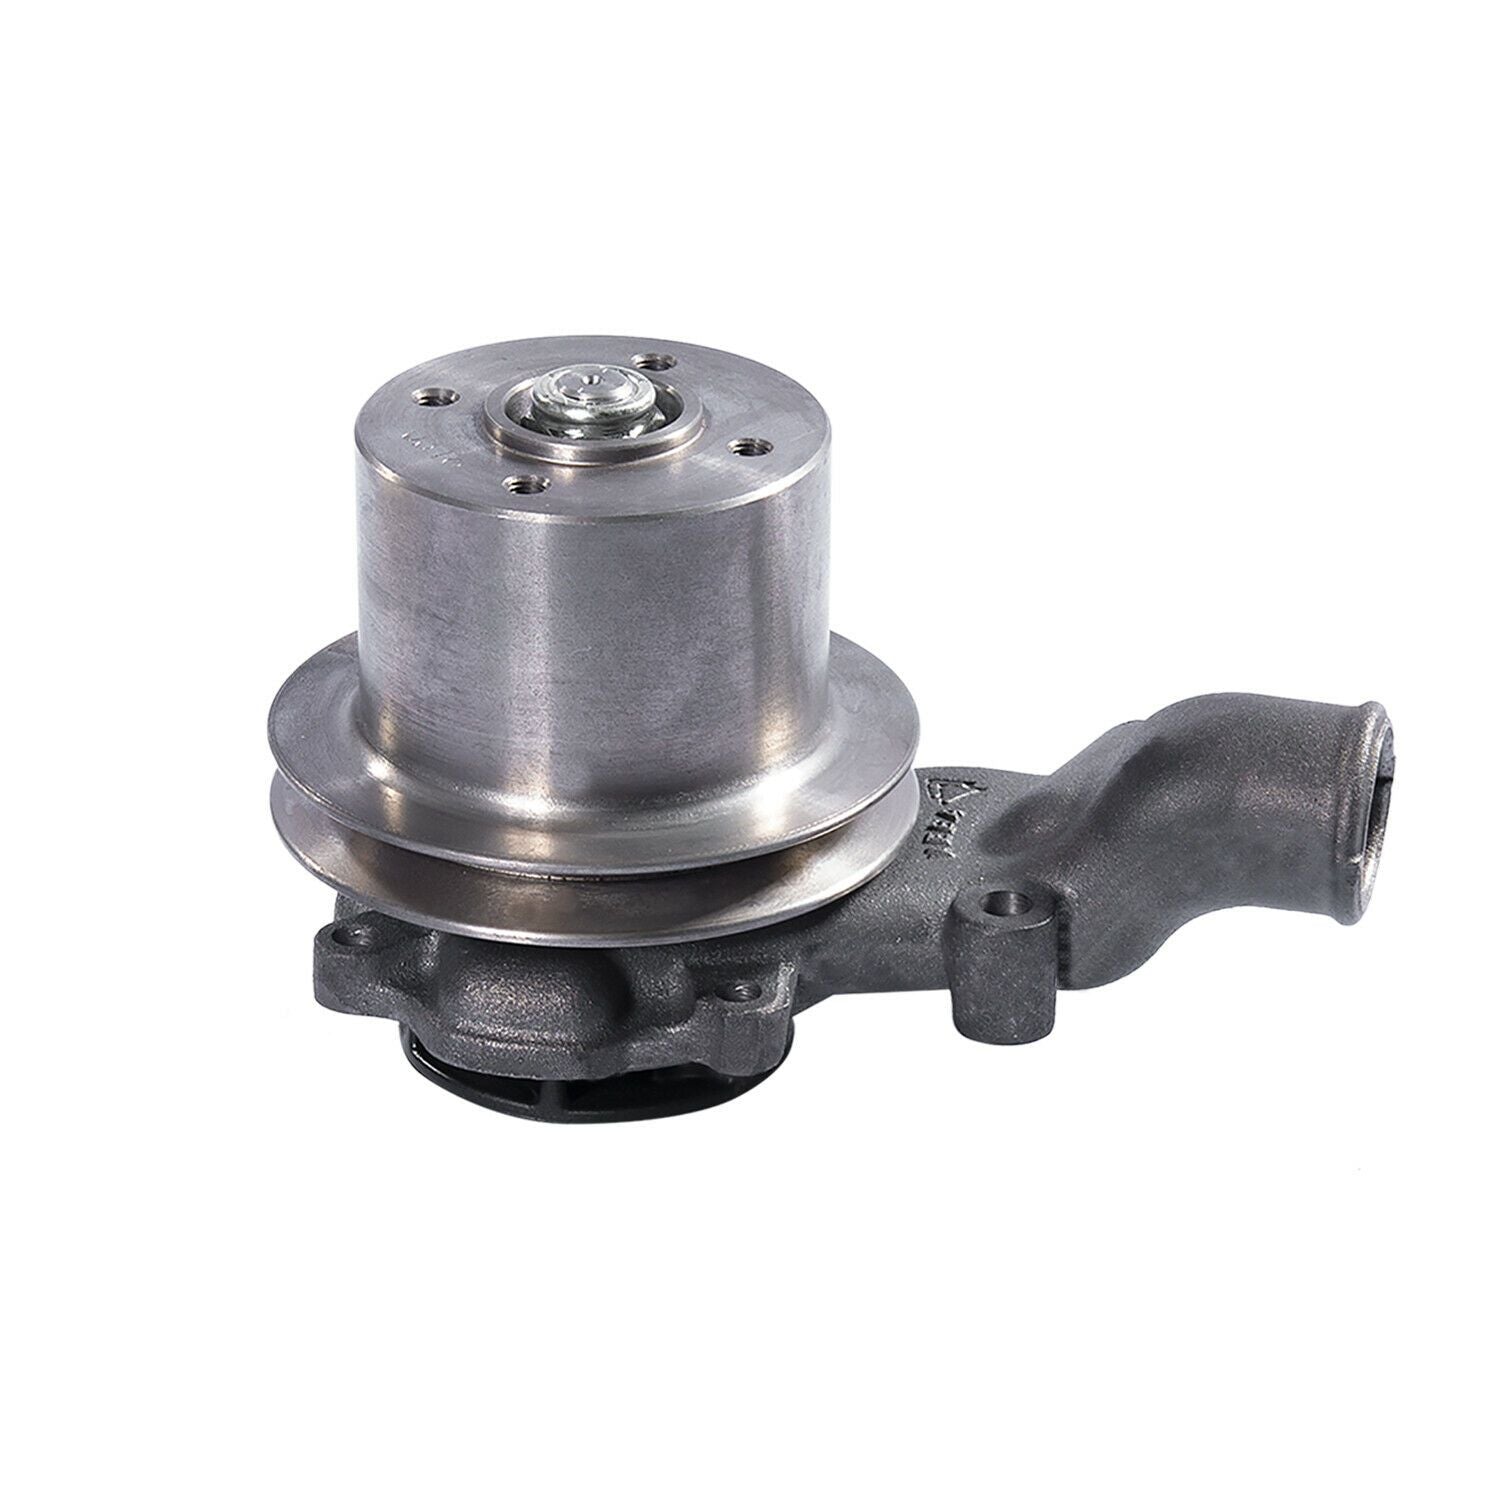 Water Pump with Pulley for Perkins 4.236 , Massey Ferguson U5MW0104 , 4131A013 +